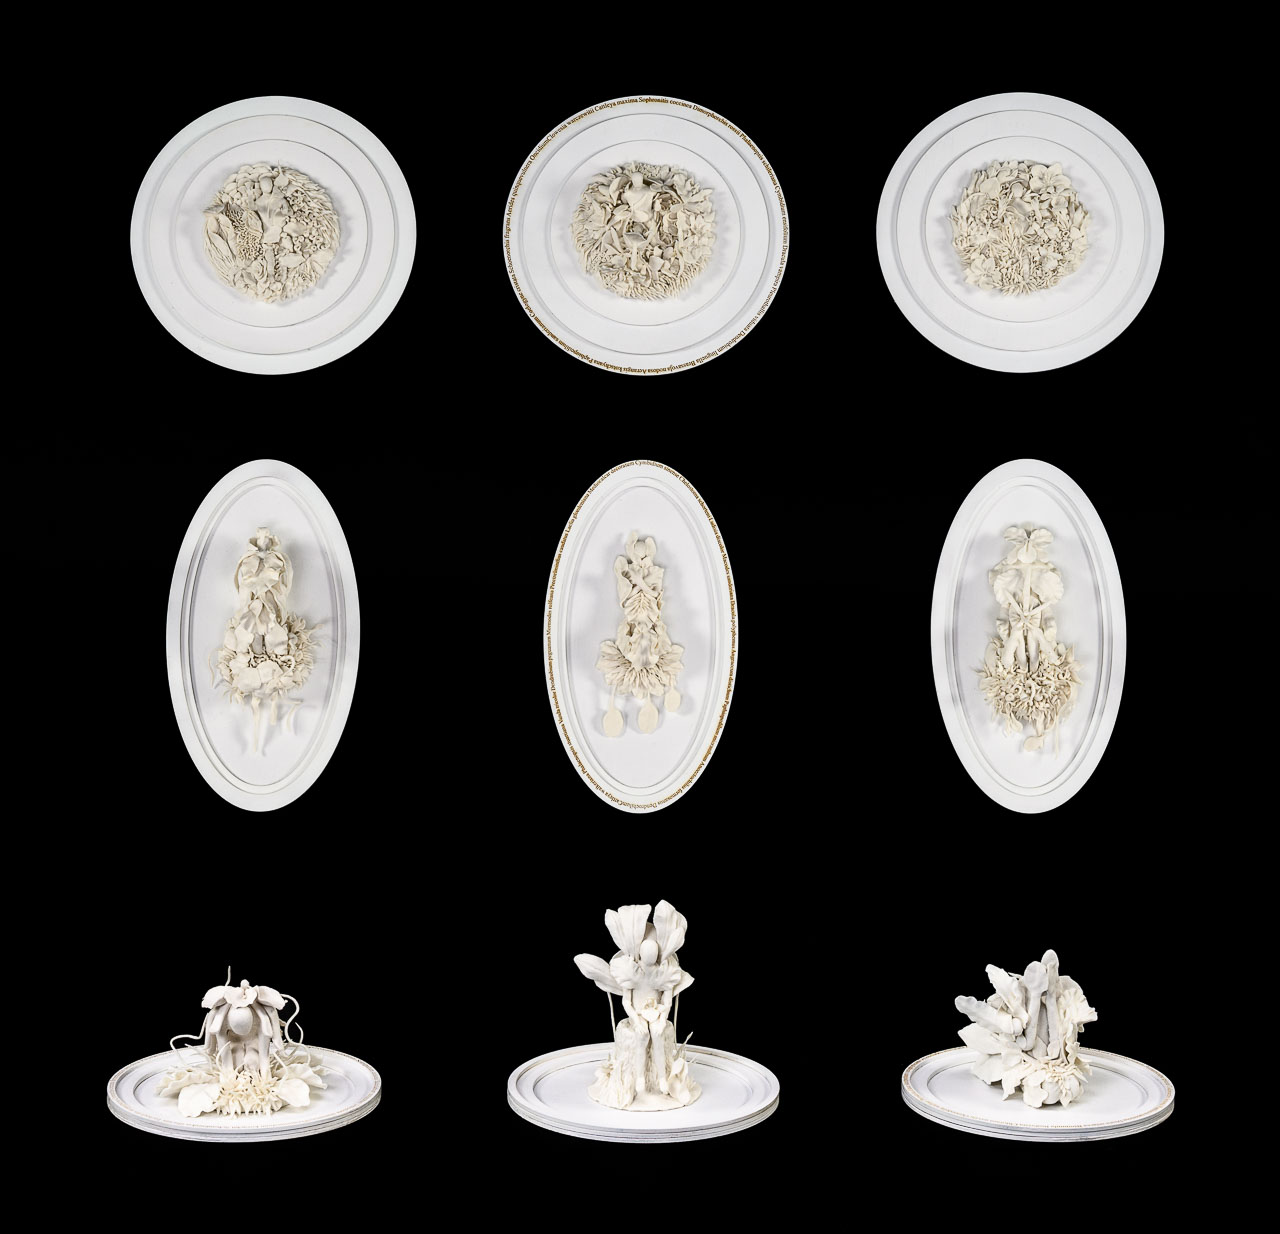 A series of white flowerlike porcelain sculptures on oval plates.